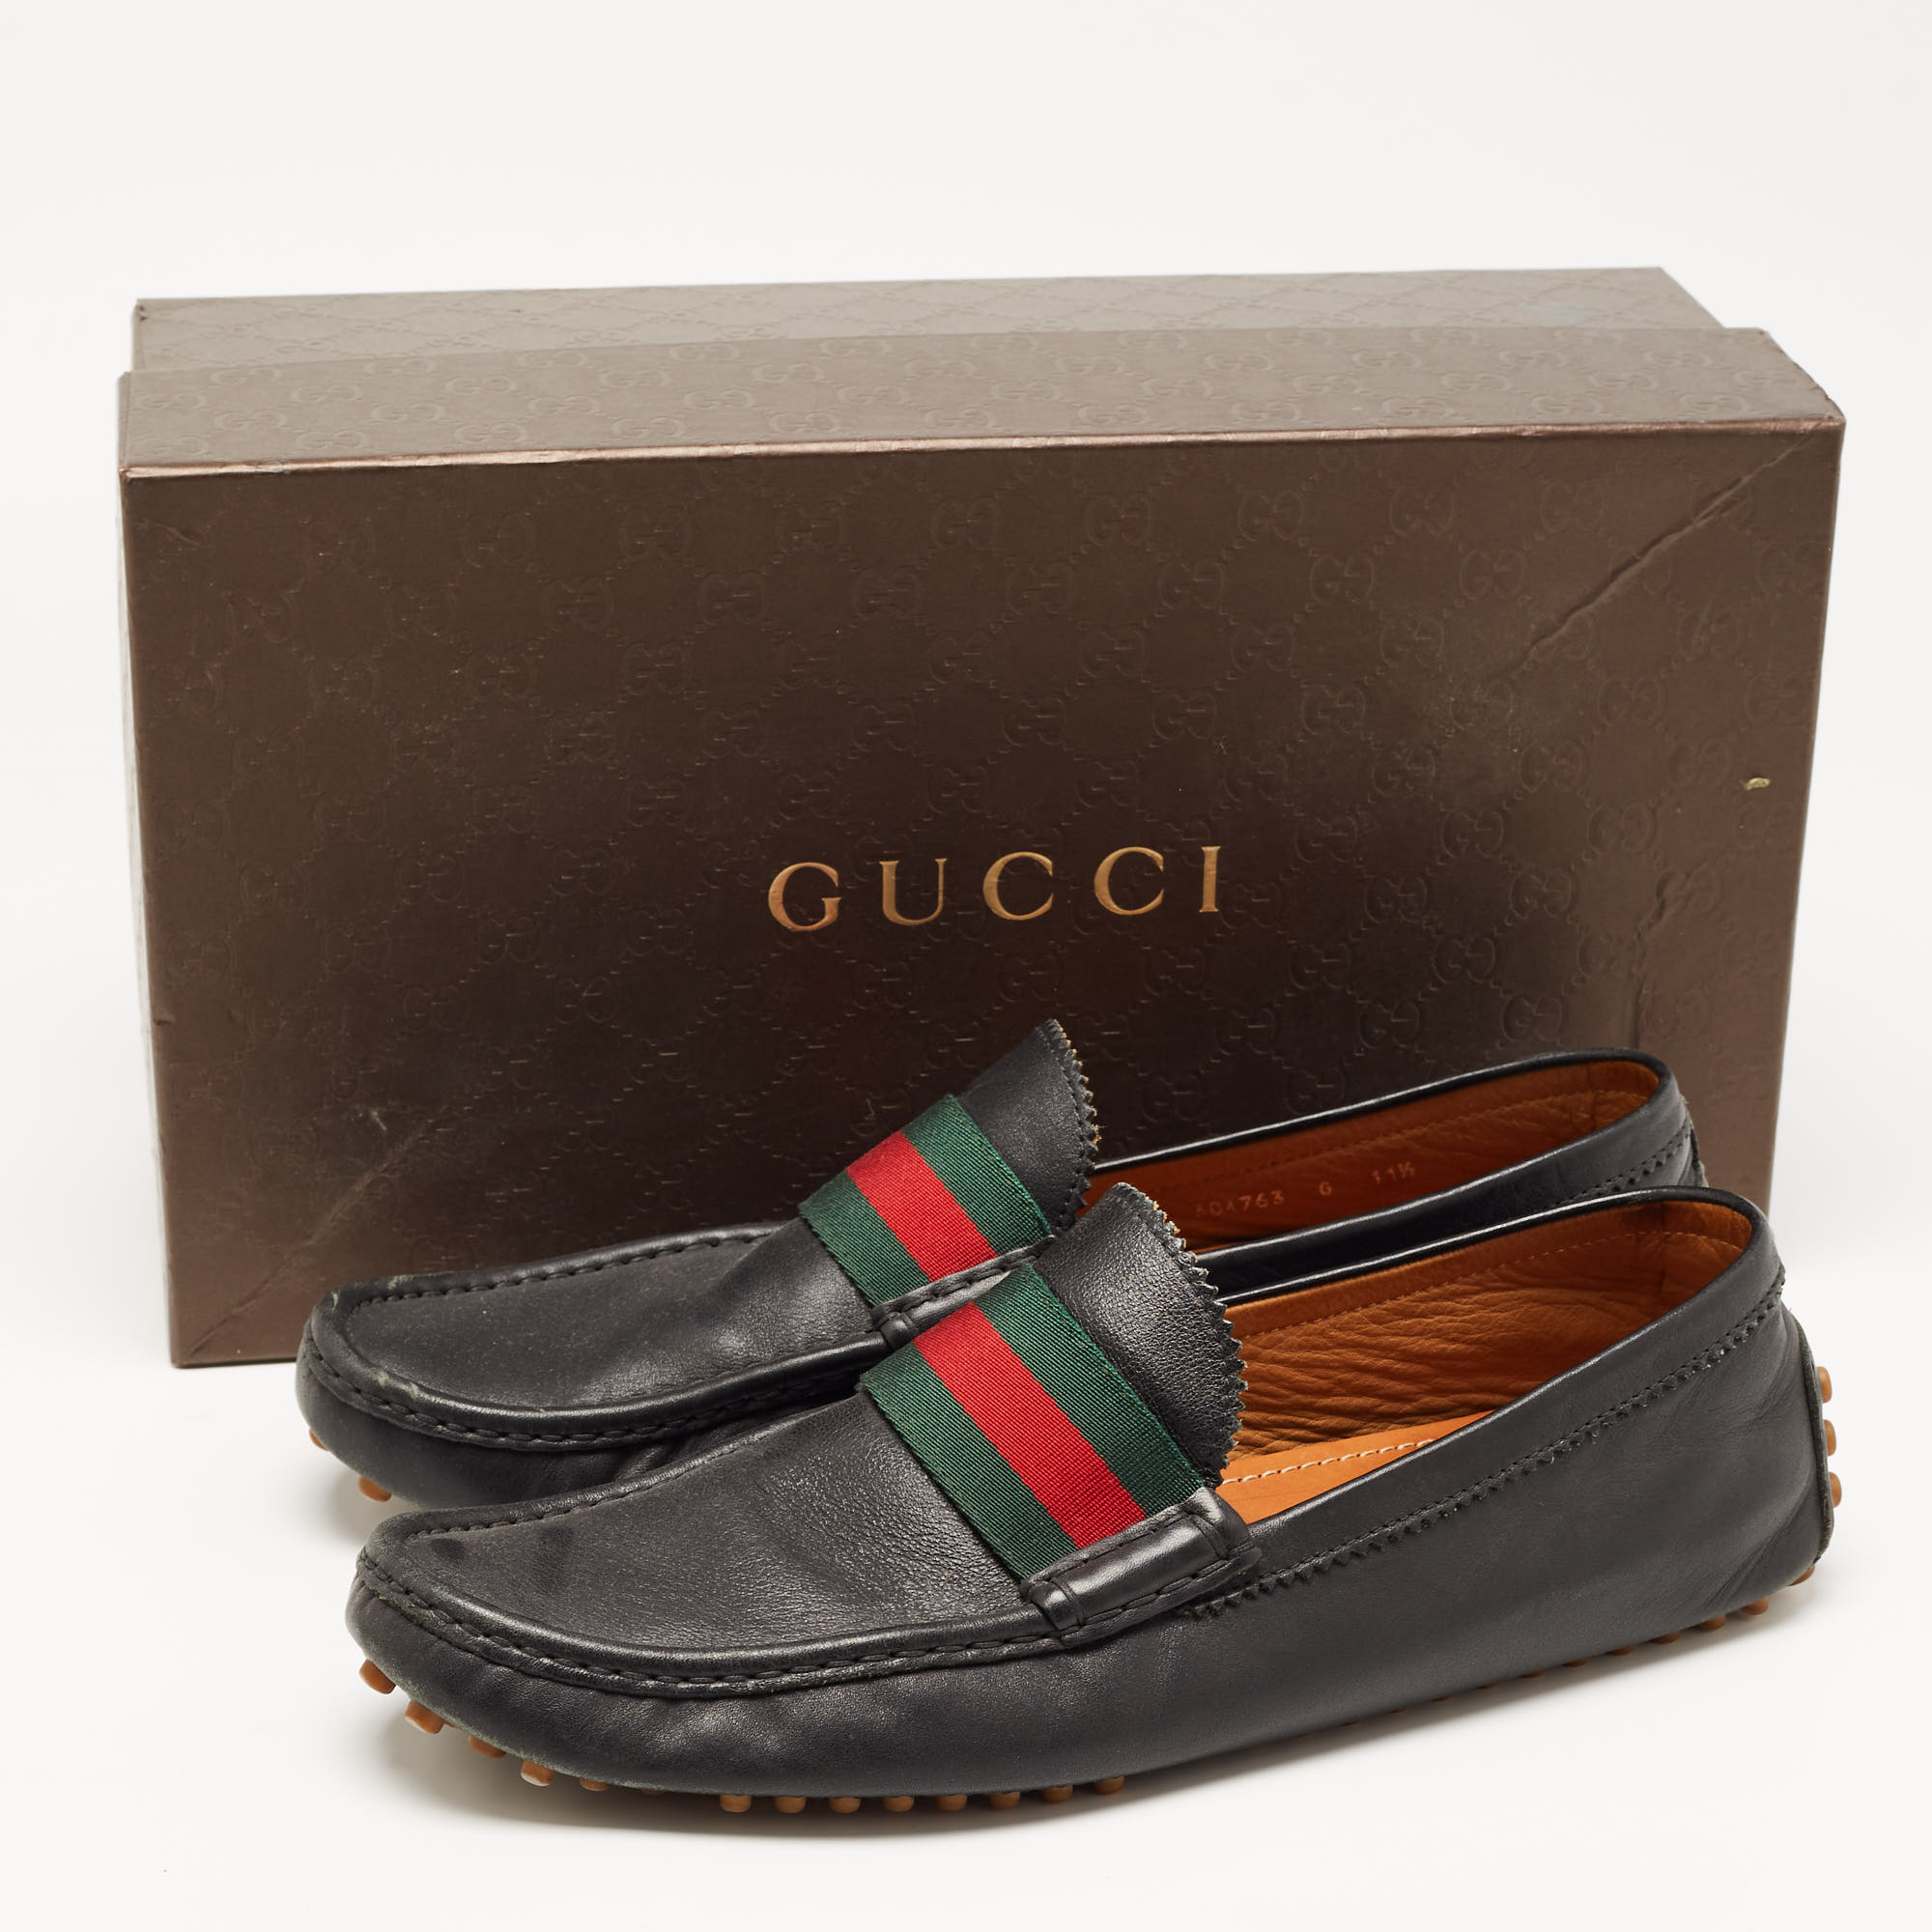 Gucci Navy Blue Leather Web Trim Loafers Size 45.5